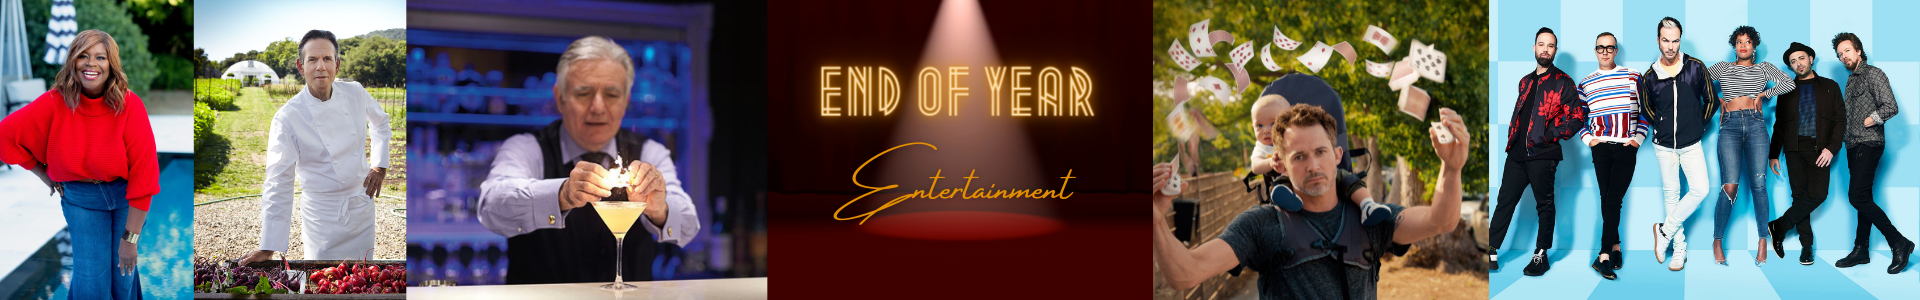 End of Year Entertainment Banner